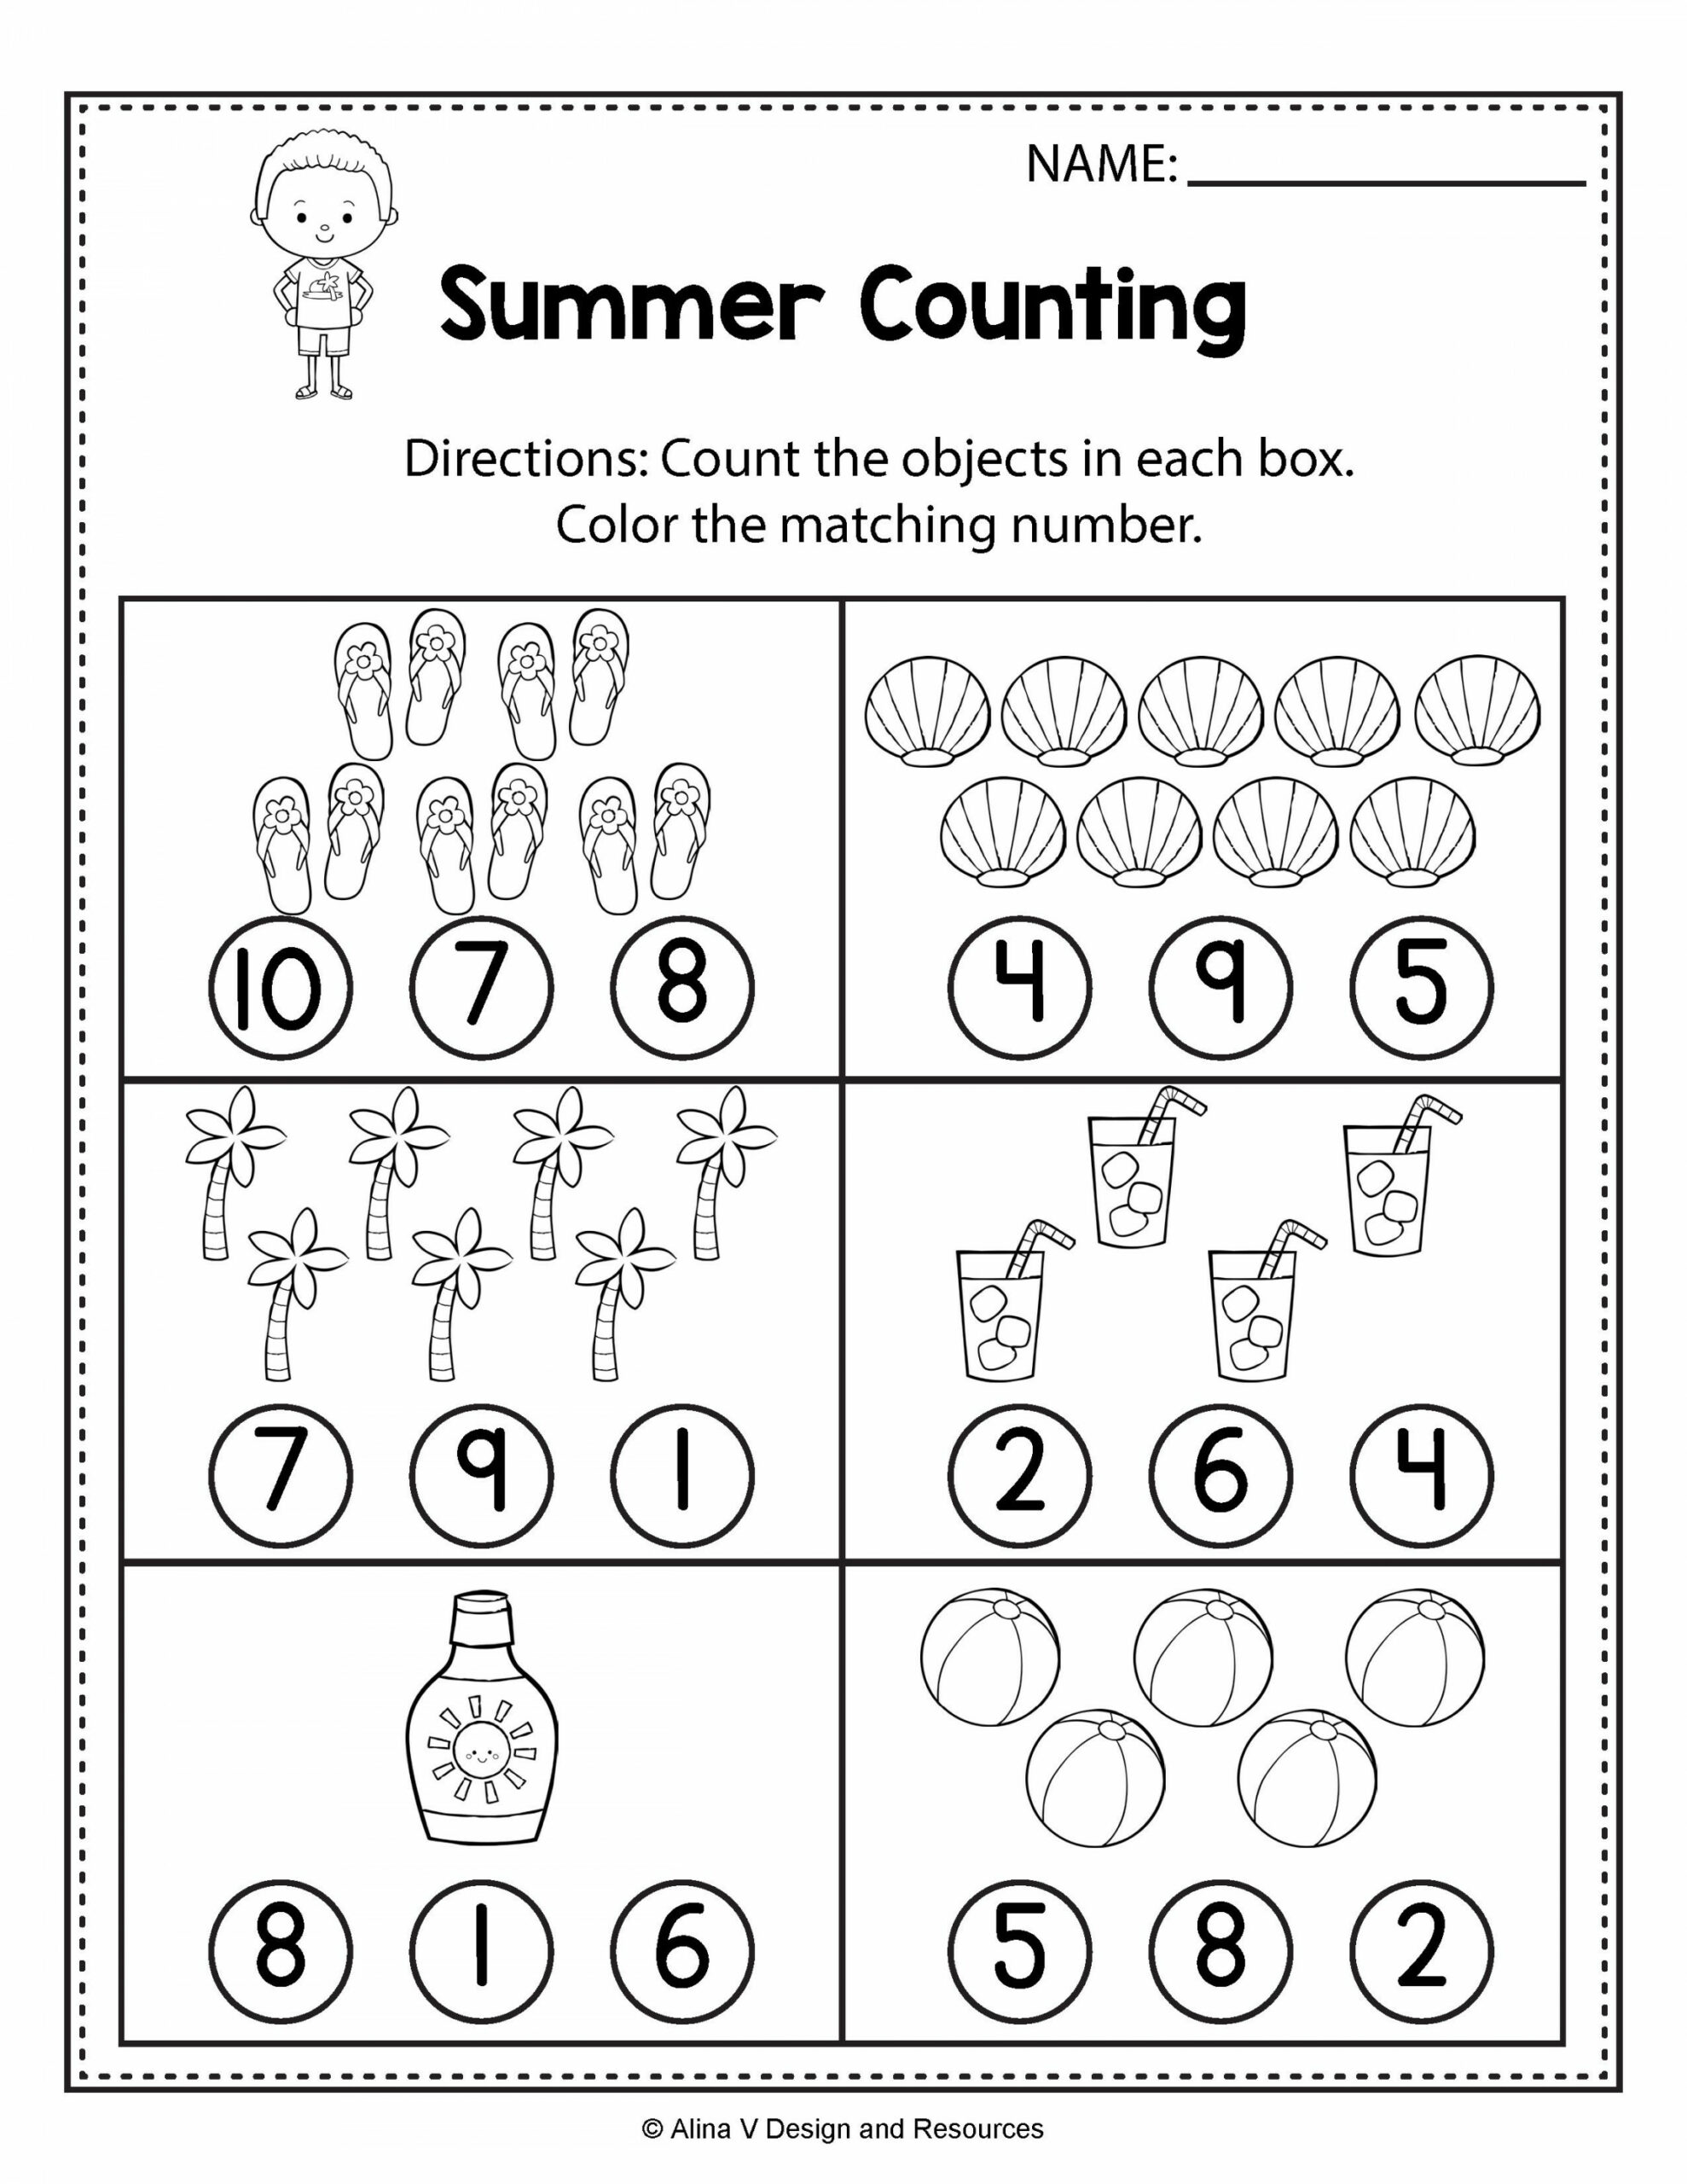 Counting Worksheets - Summer Math Worksheets and activities for